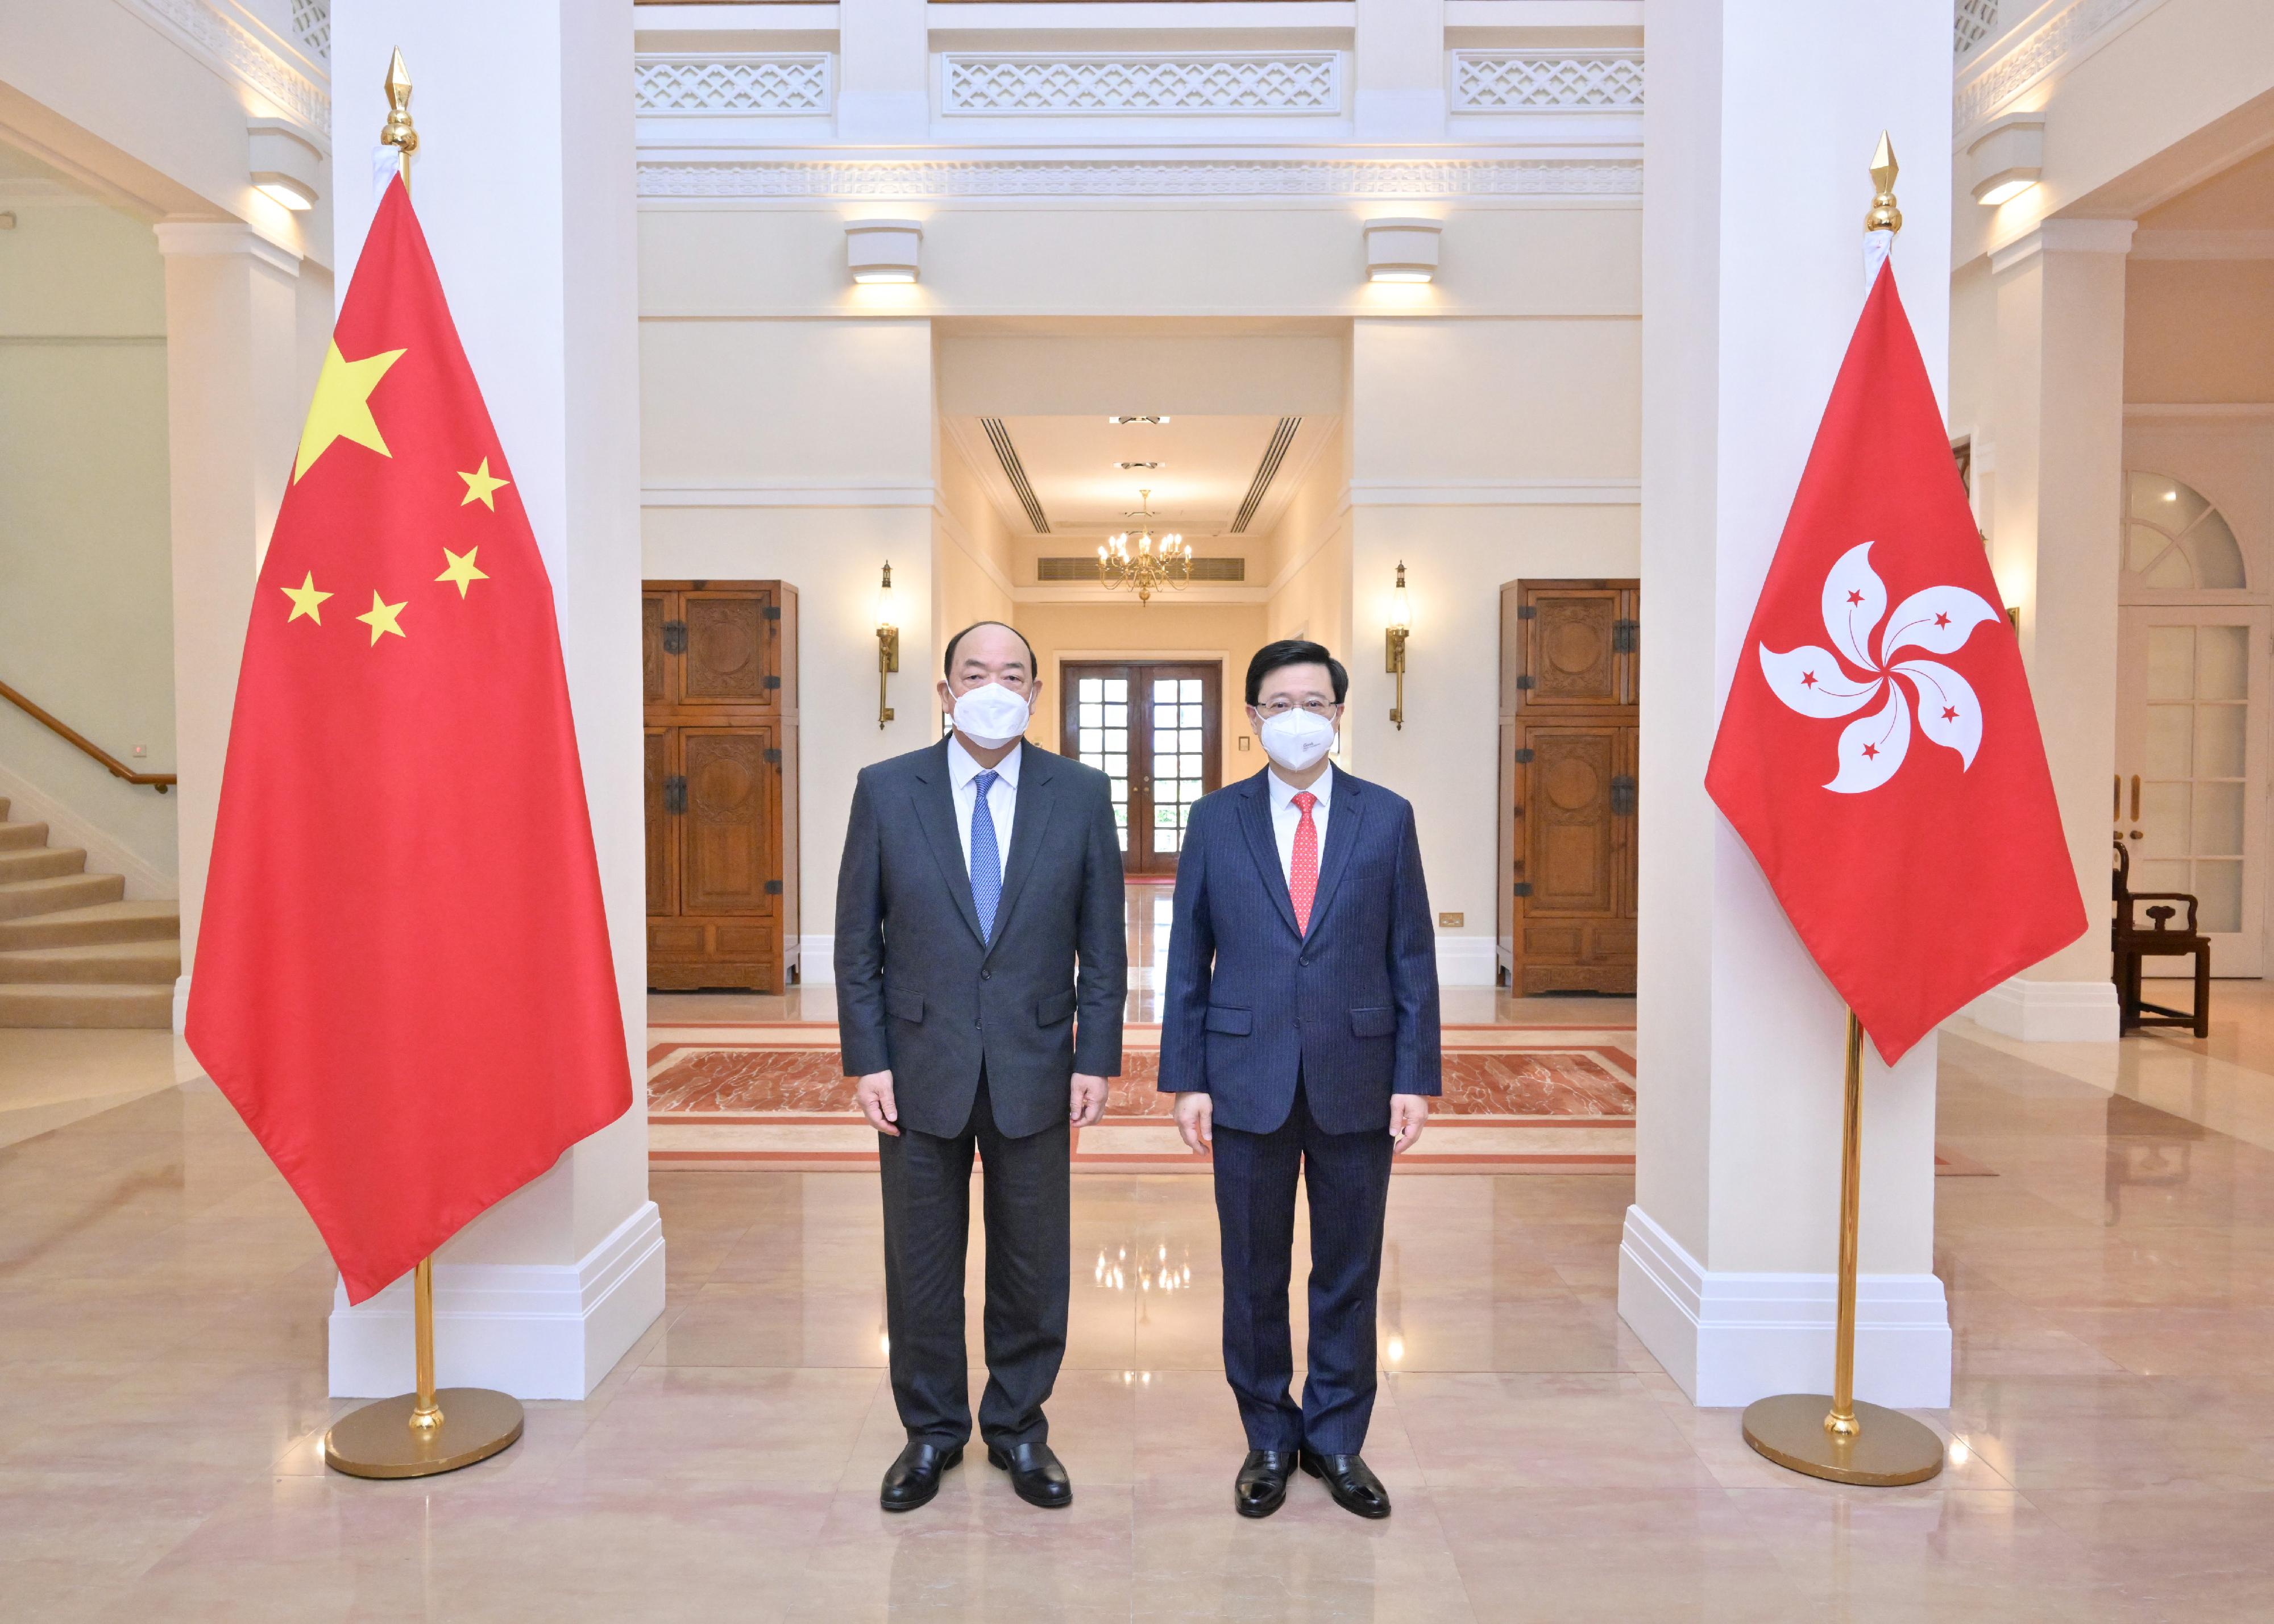 The Chief Executive, Mr John Lee (right), met with the Chief Executive of the Macao Special Administrative Region, Mr Ho Iat-seng (left), at Government House today (February 25).